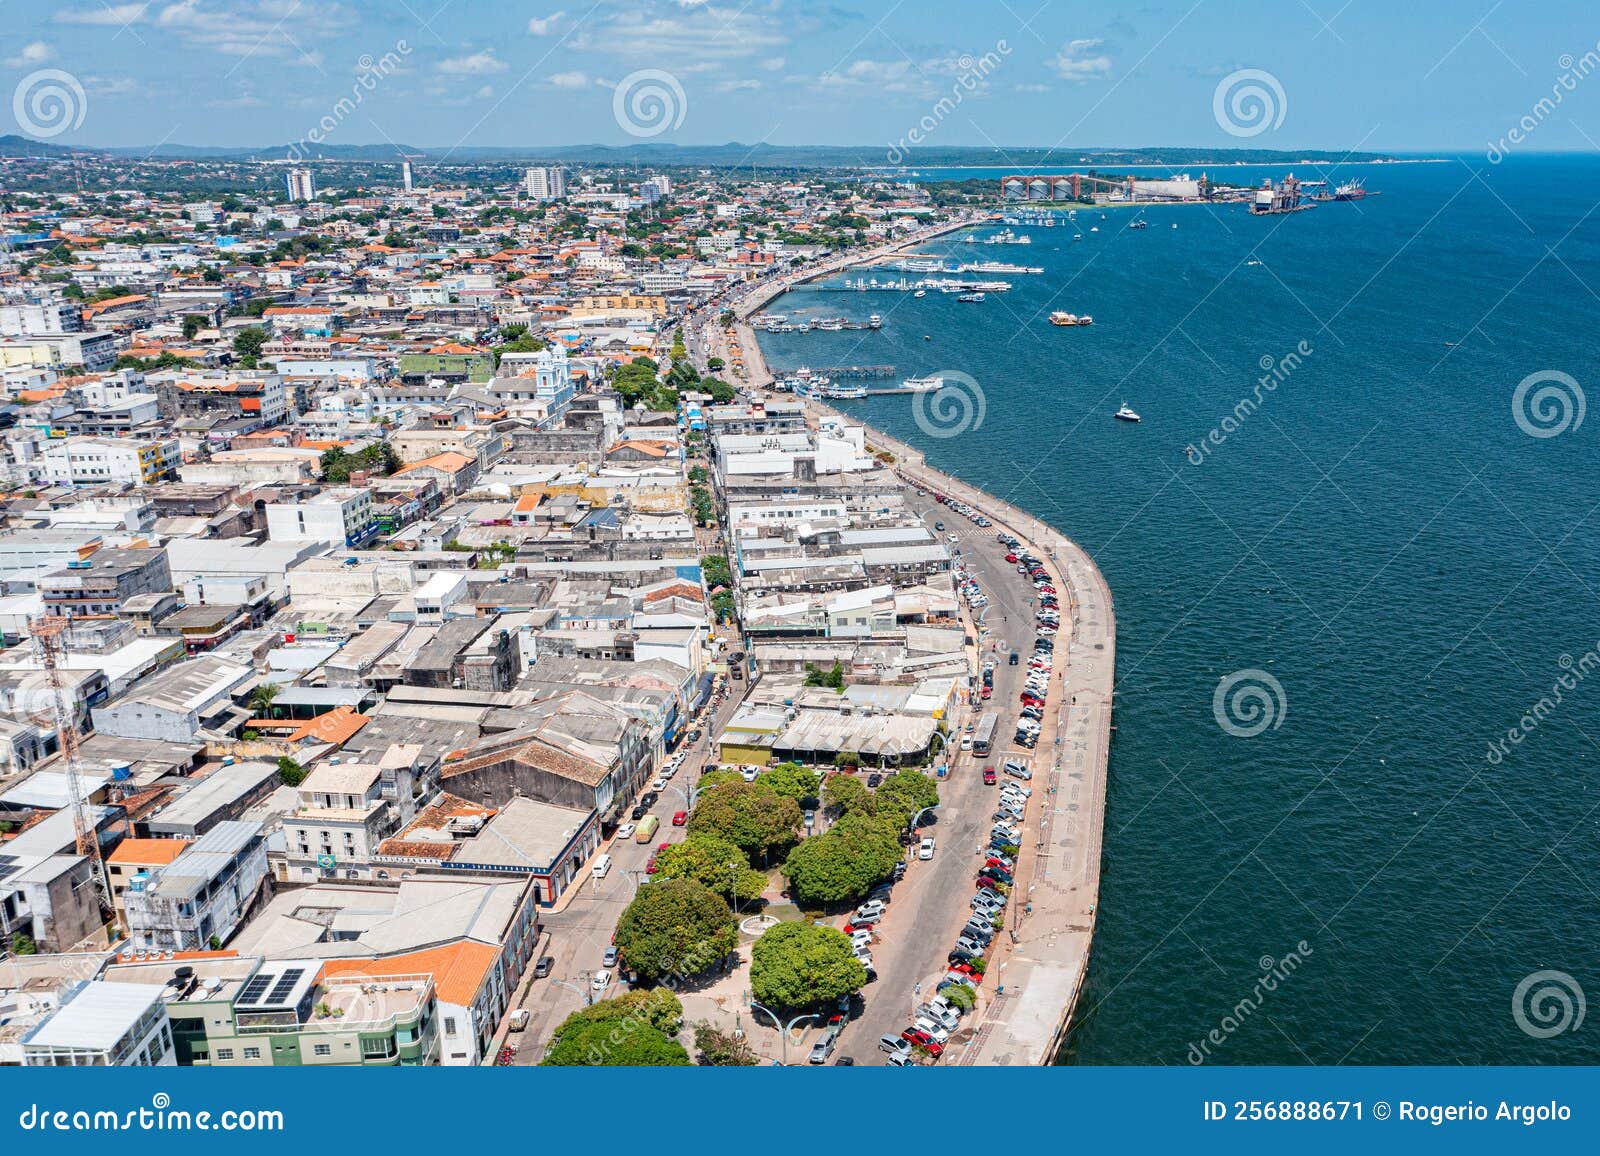 aerial photo of the waterfront of the city of santarÃÂ©m on the tapajÃÂ³s river, parÃÂ¡, brazil.